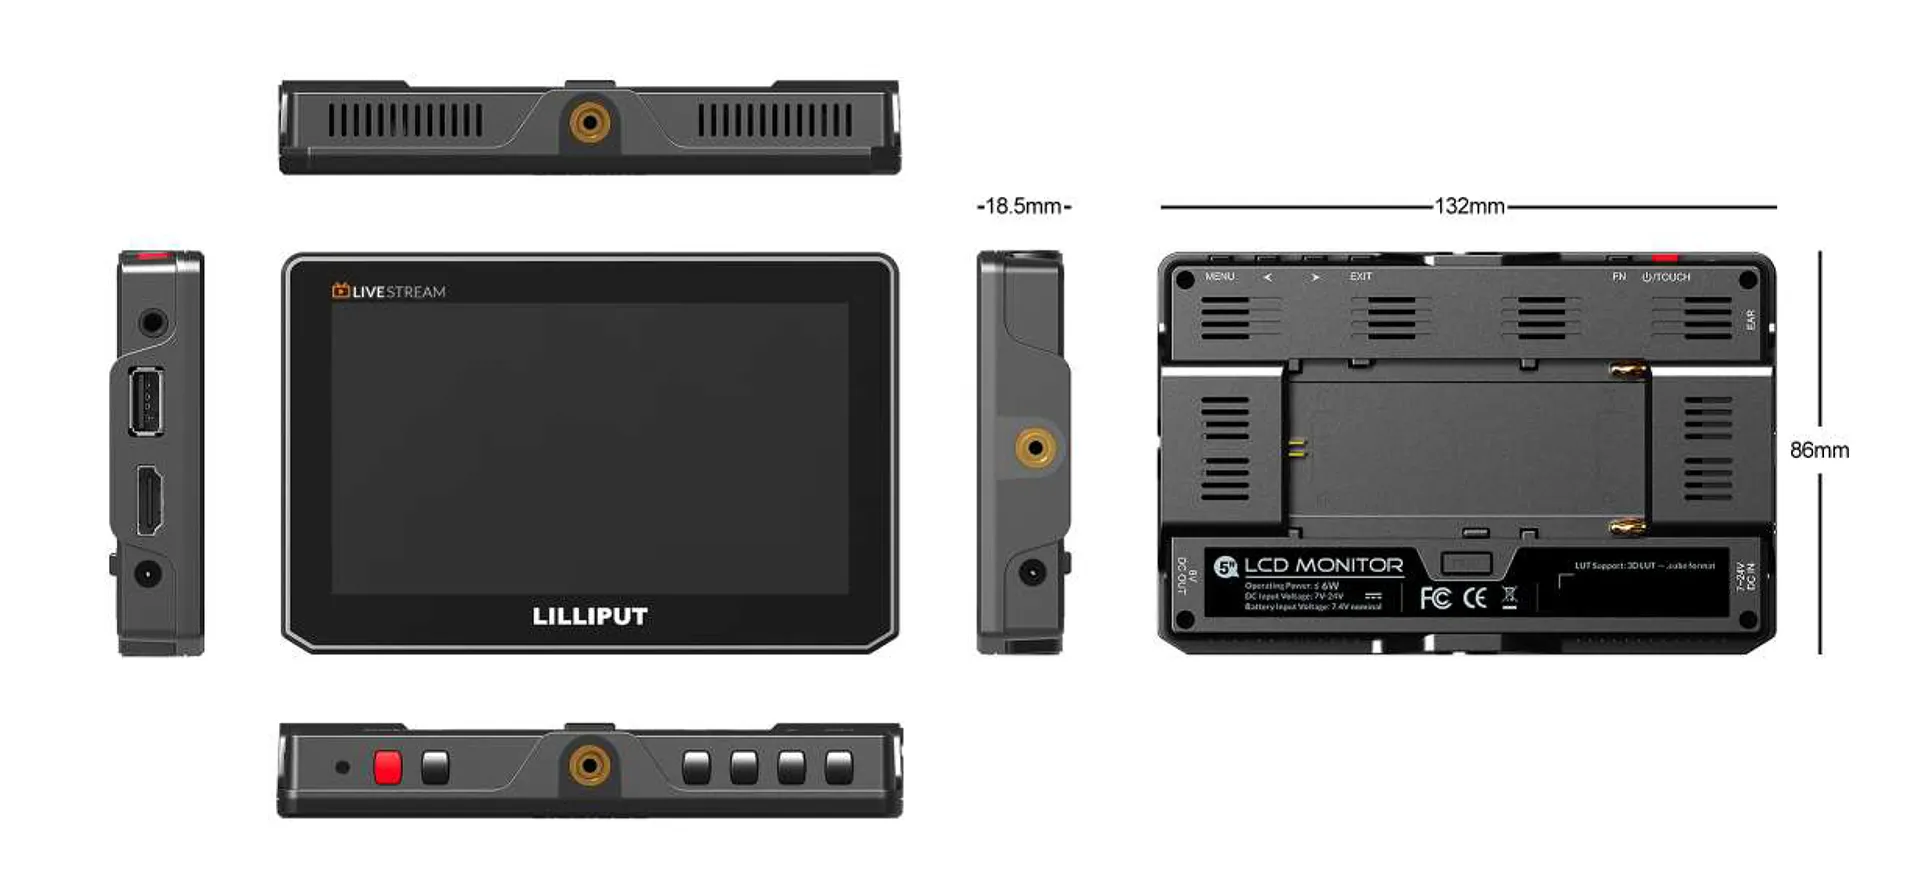 Lilliput T5U - 5 inch live streaming on-camera touch monitor